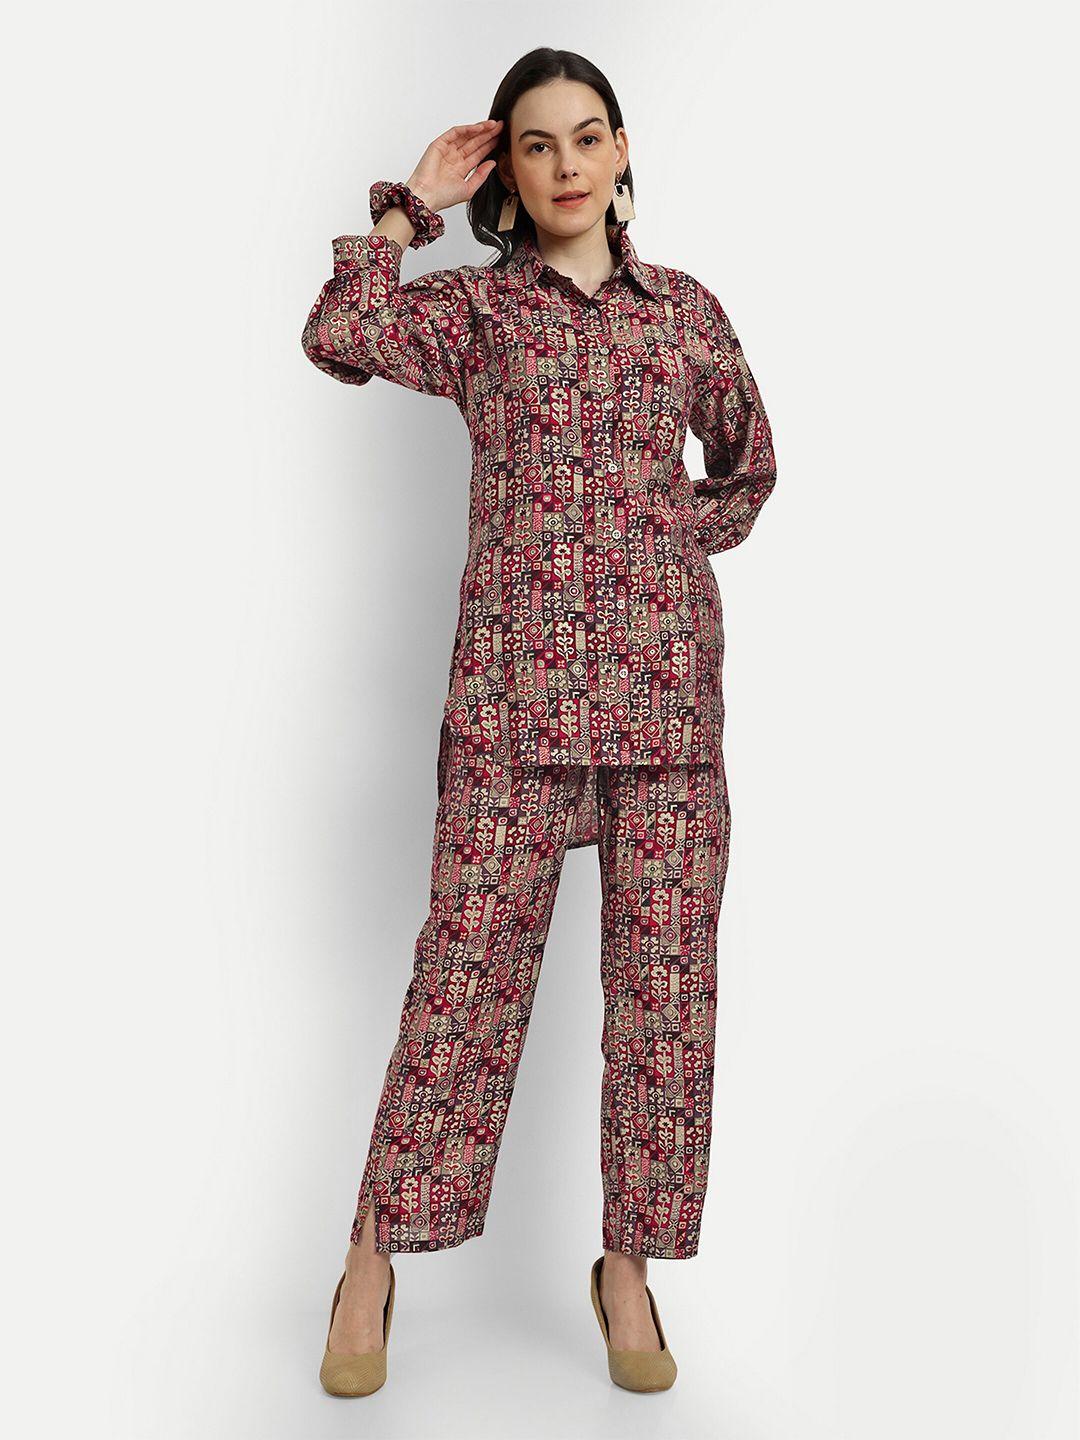 shinisha floral printed shirt with trouser co-ords